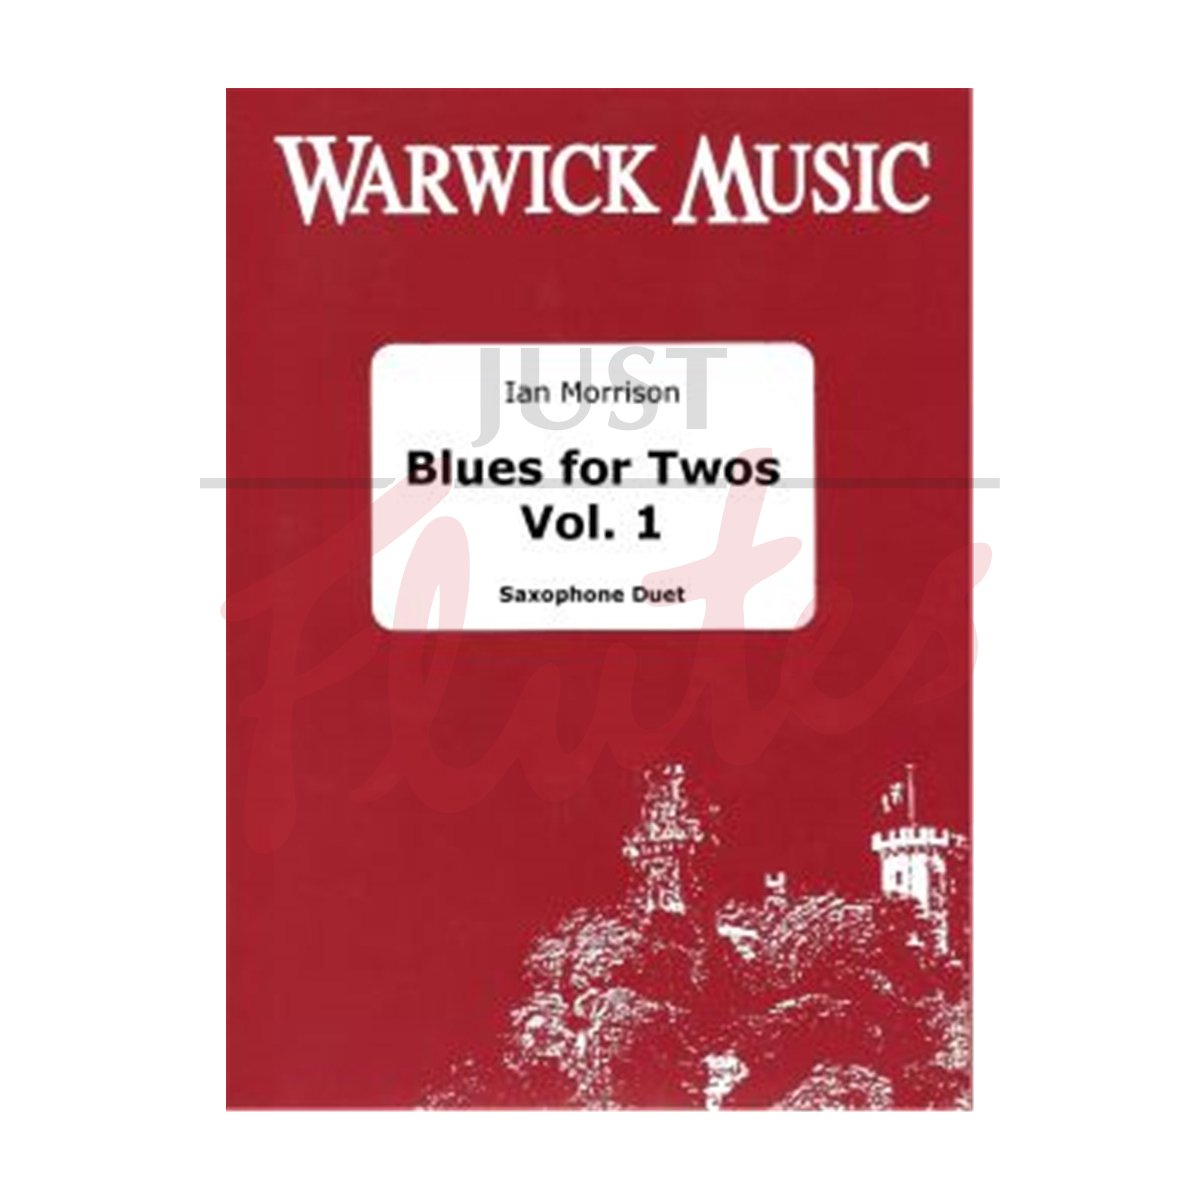 Blues for Twos, Volume 1 for Saxophone Duet